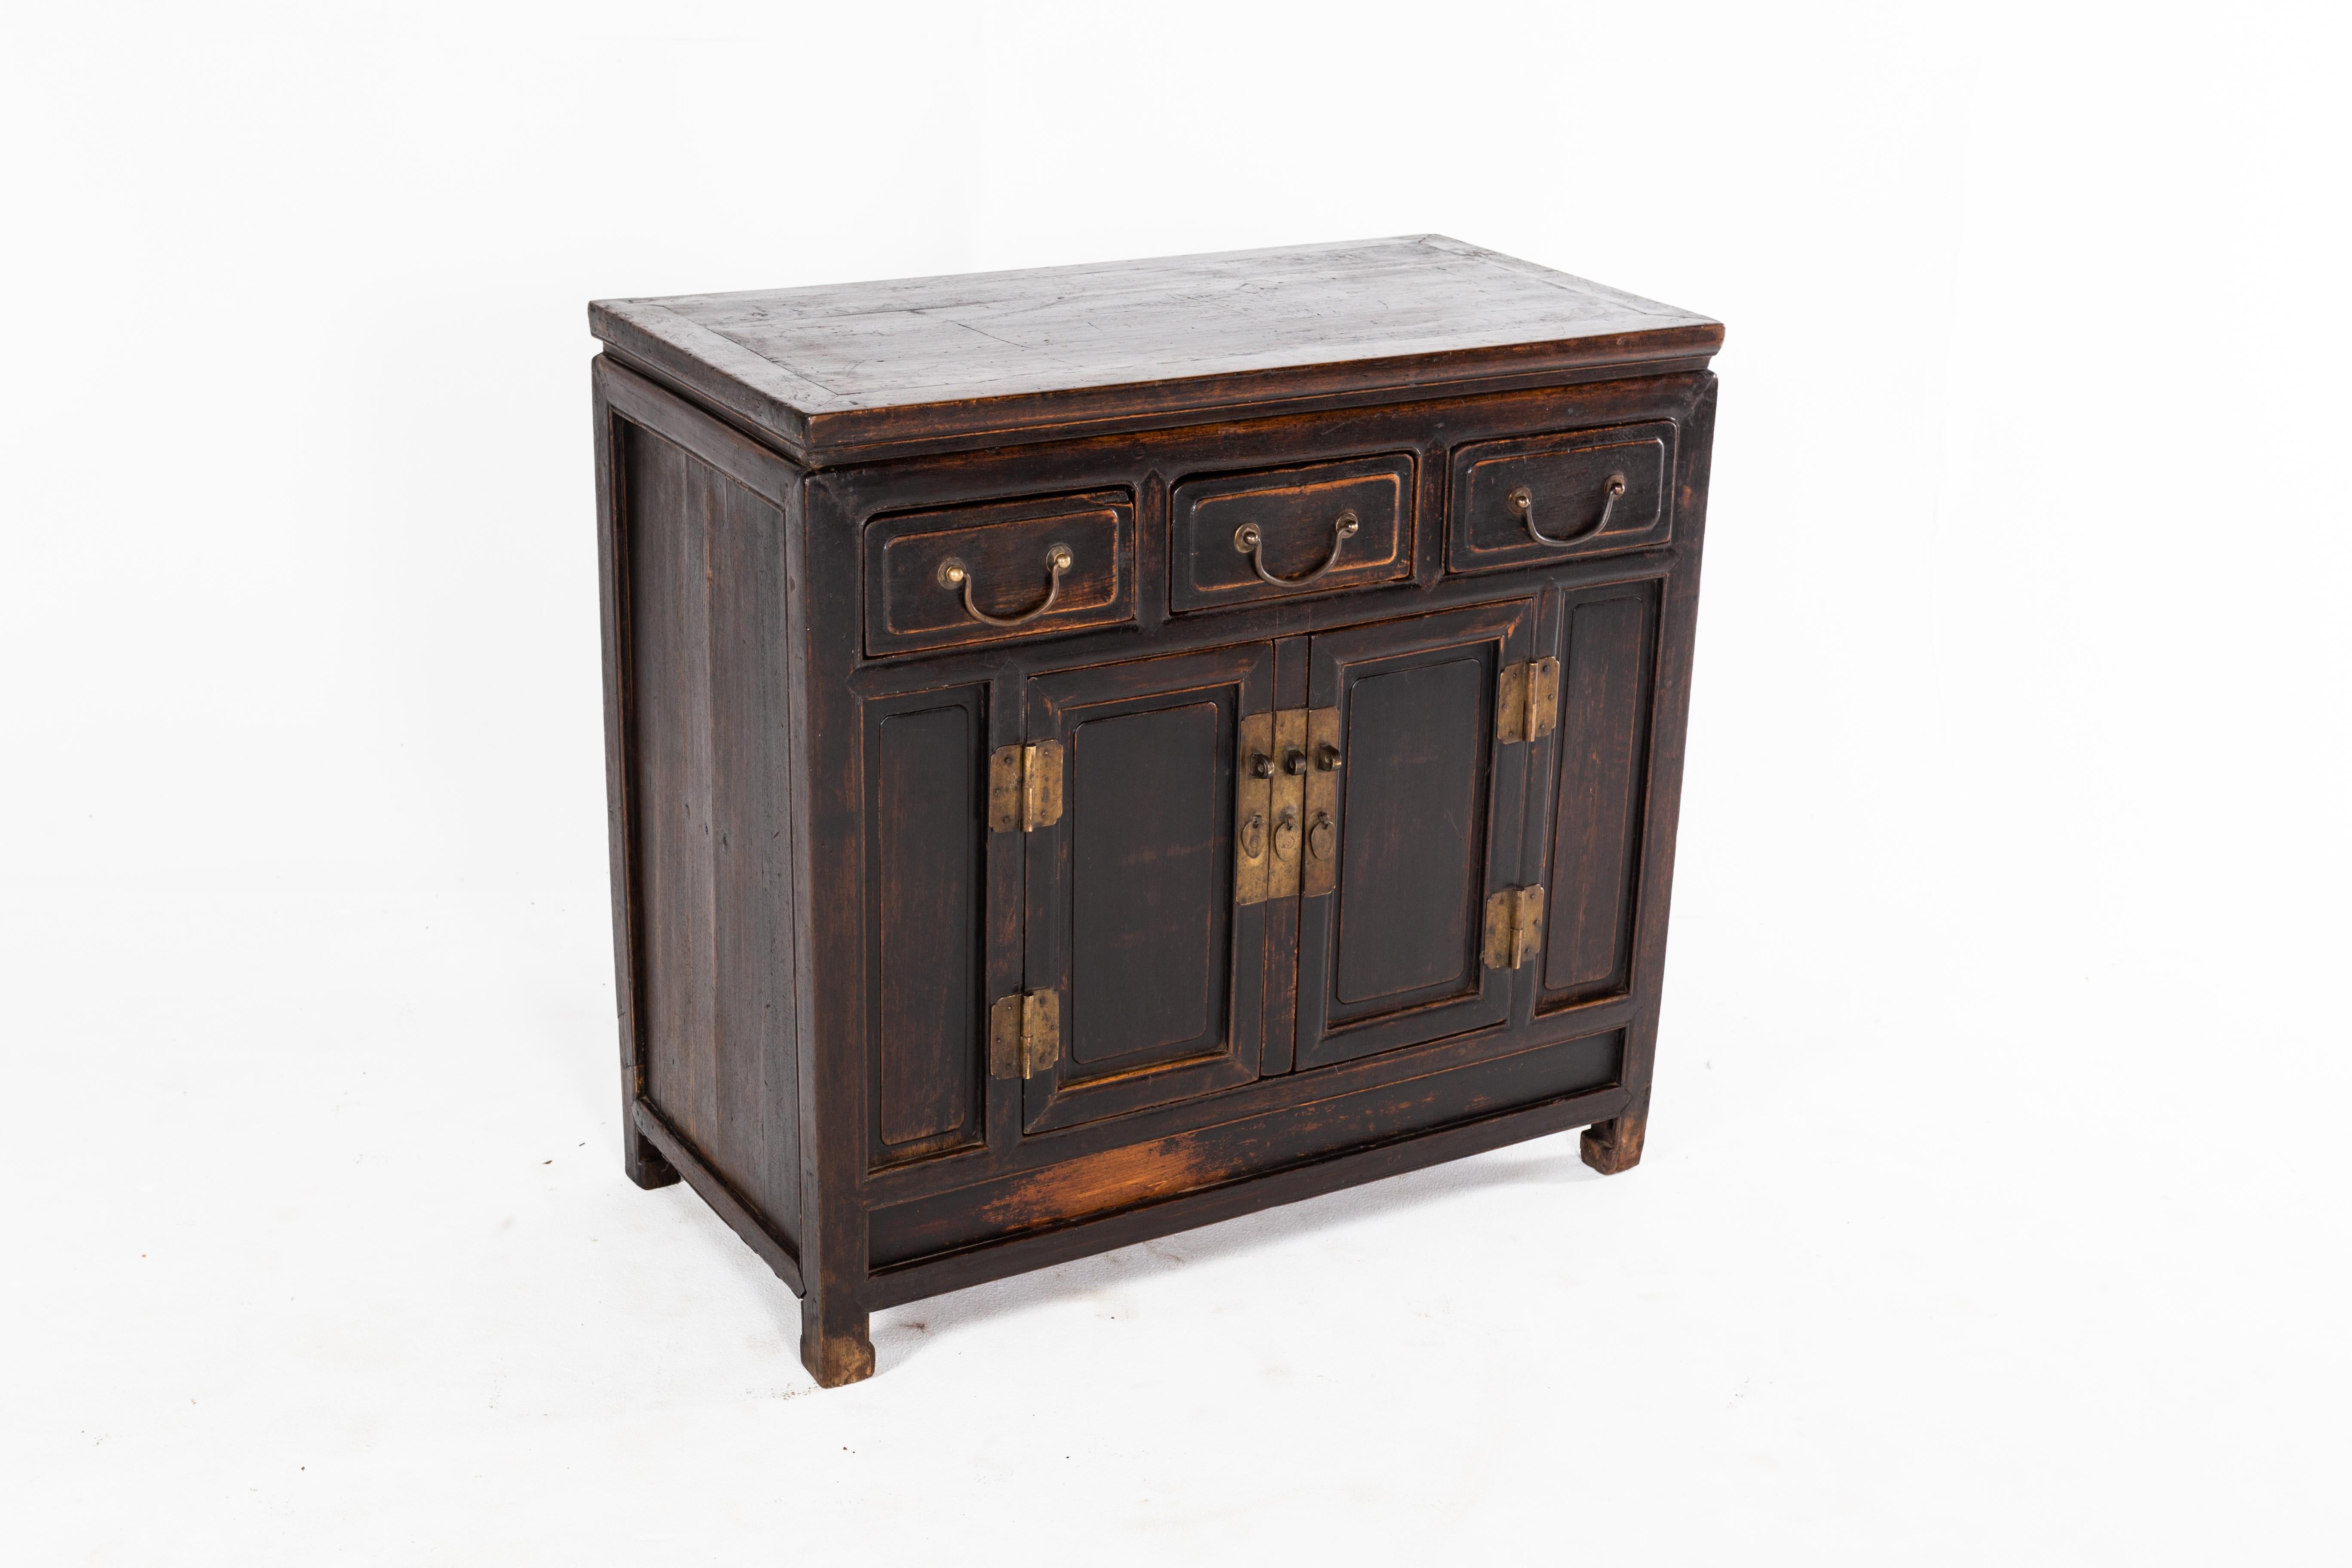 Metal Qing Dynasty Cabinet with Three Drawers and a Pair of Doors